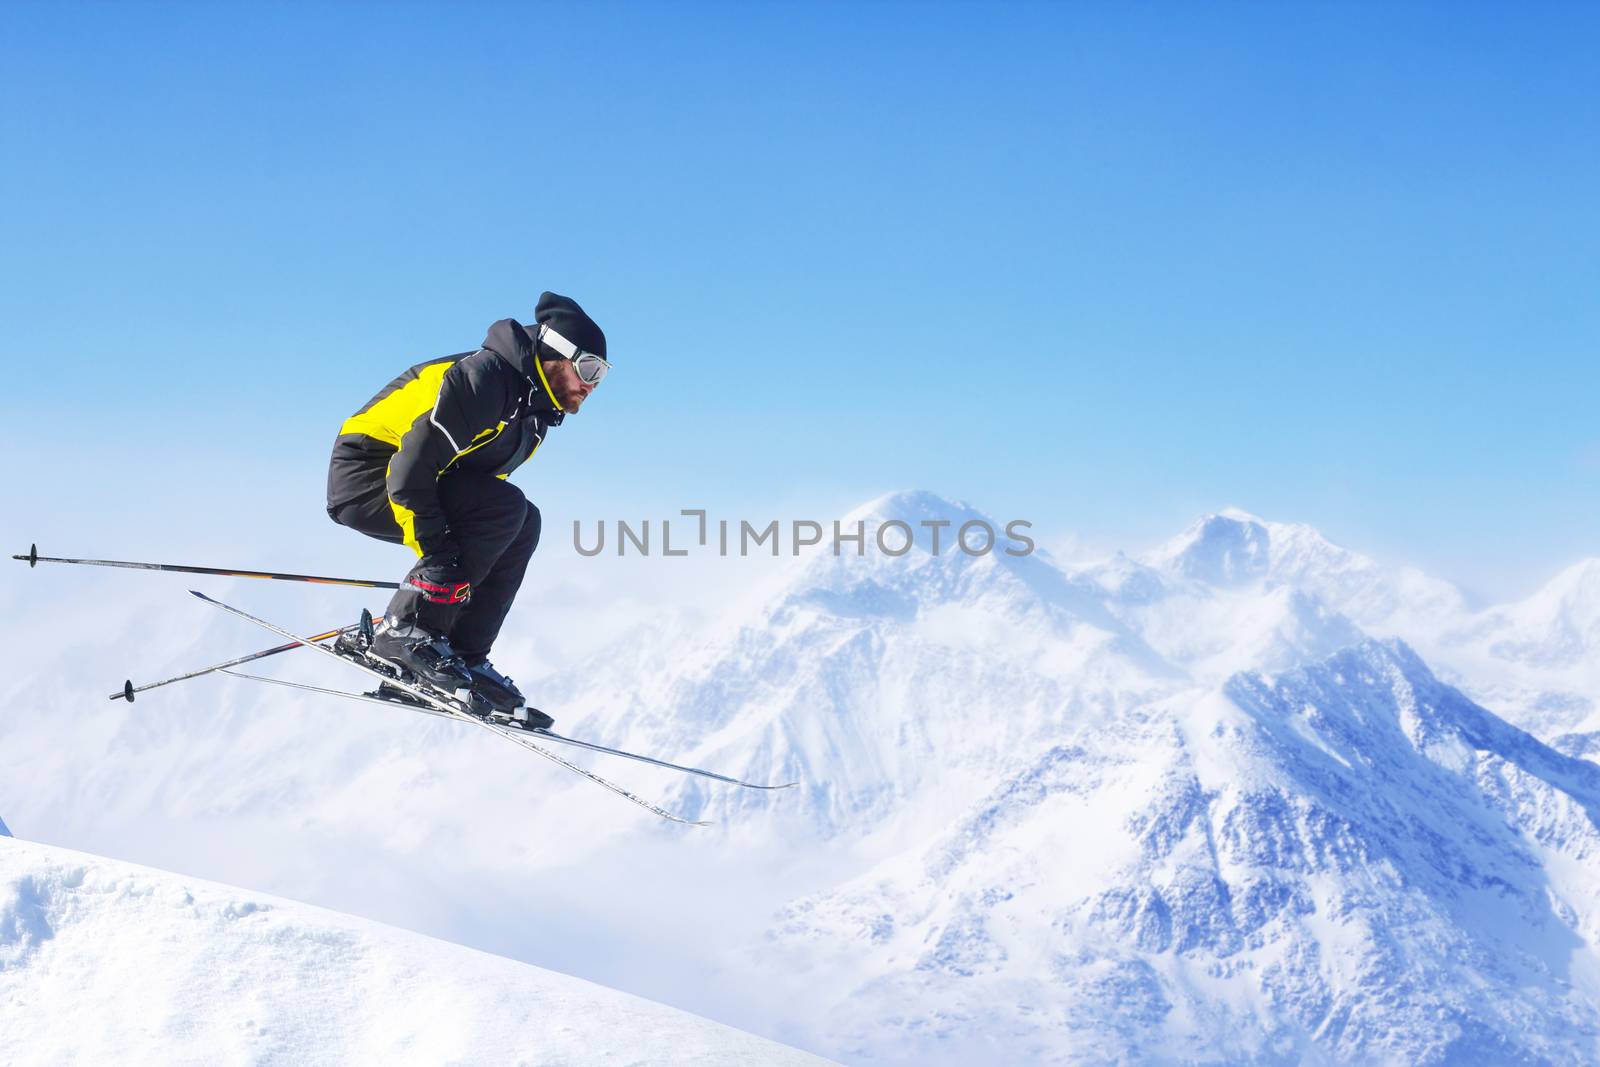 Jumping skier at jump with alpine high mountains